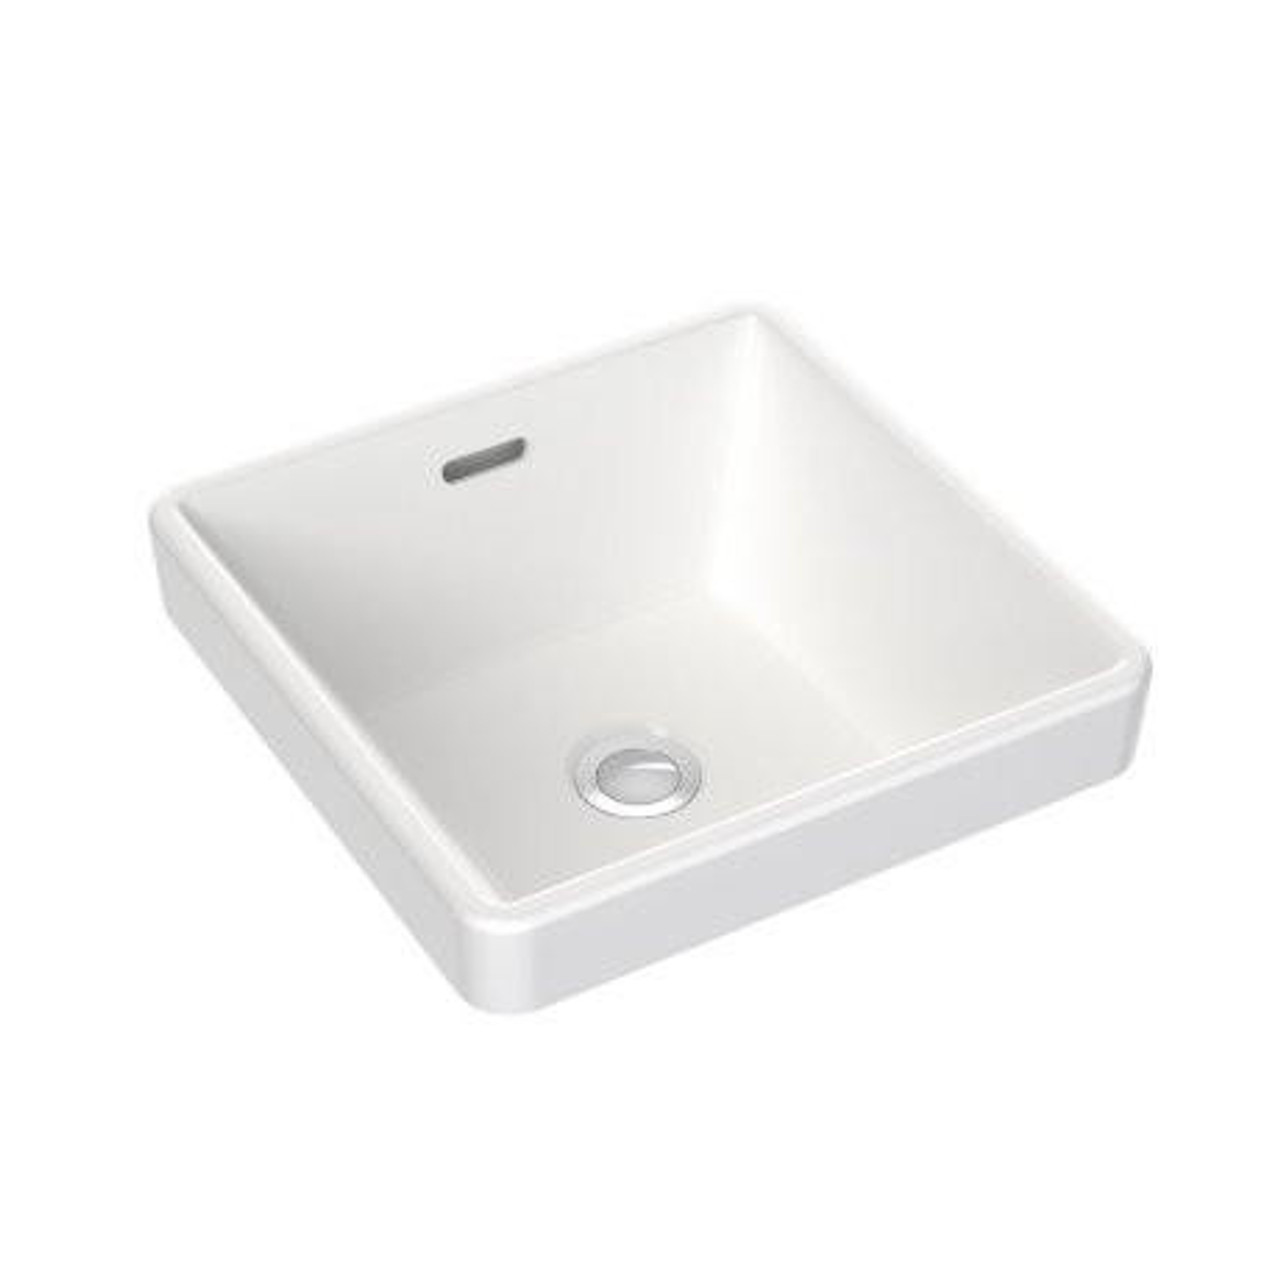 Clark Square 350 Inset Basin with Overflow CL40012.W0